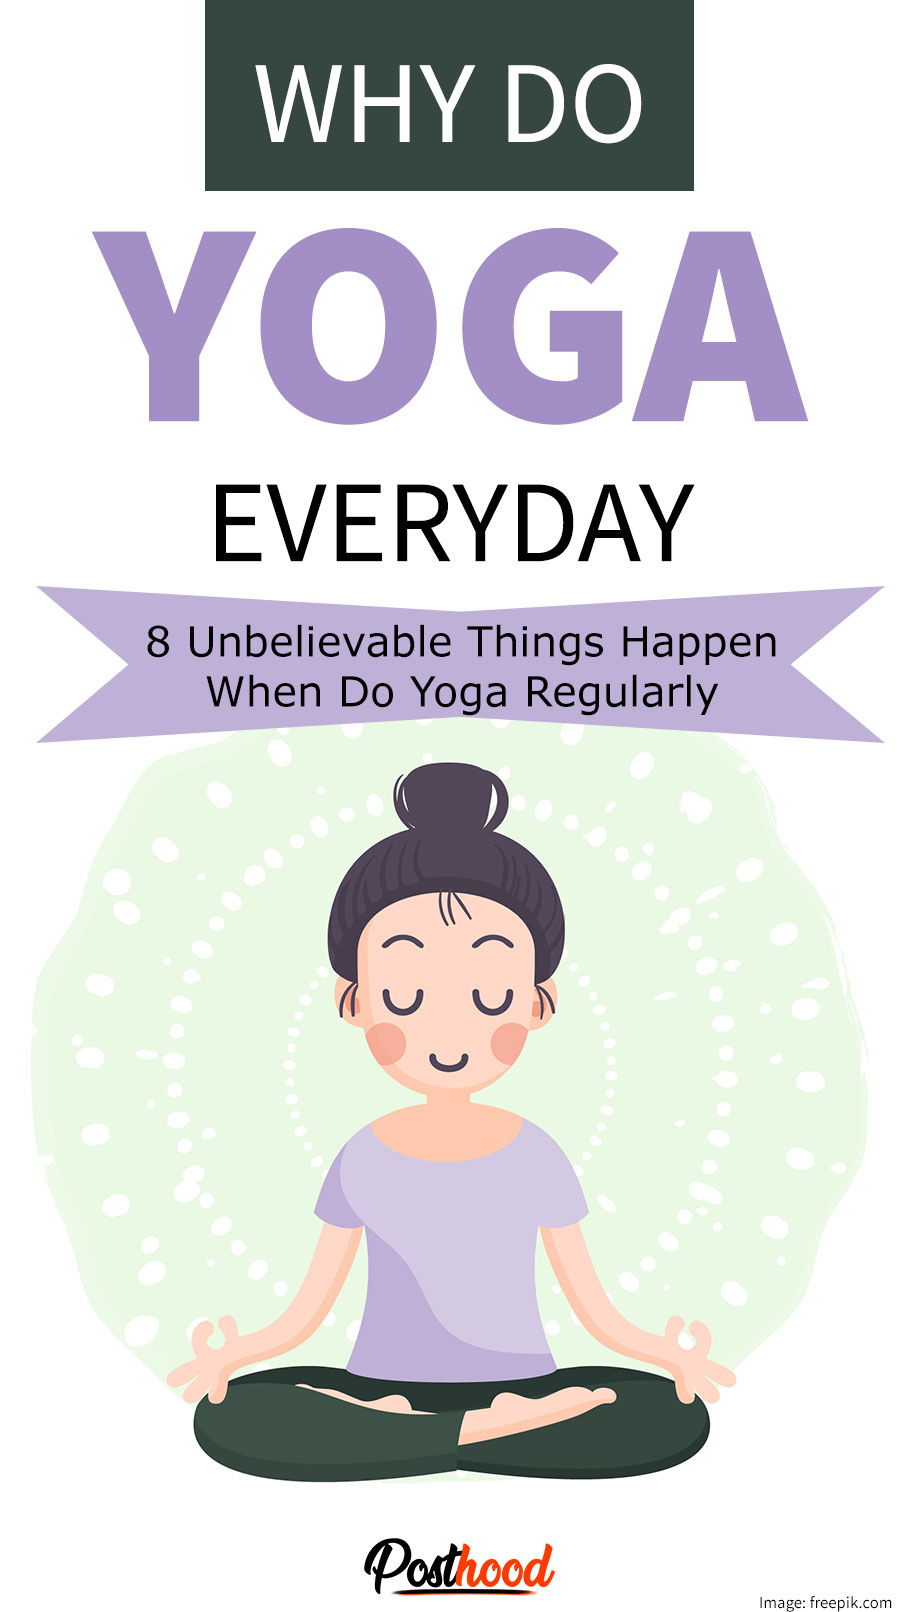 why you should do yoga everyday? 8 Unbelievable Things Happen When Do Yoga Regularly. Yoga everyday benefits.